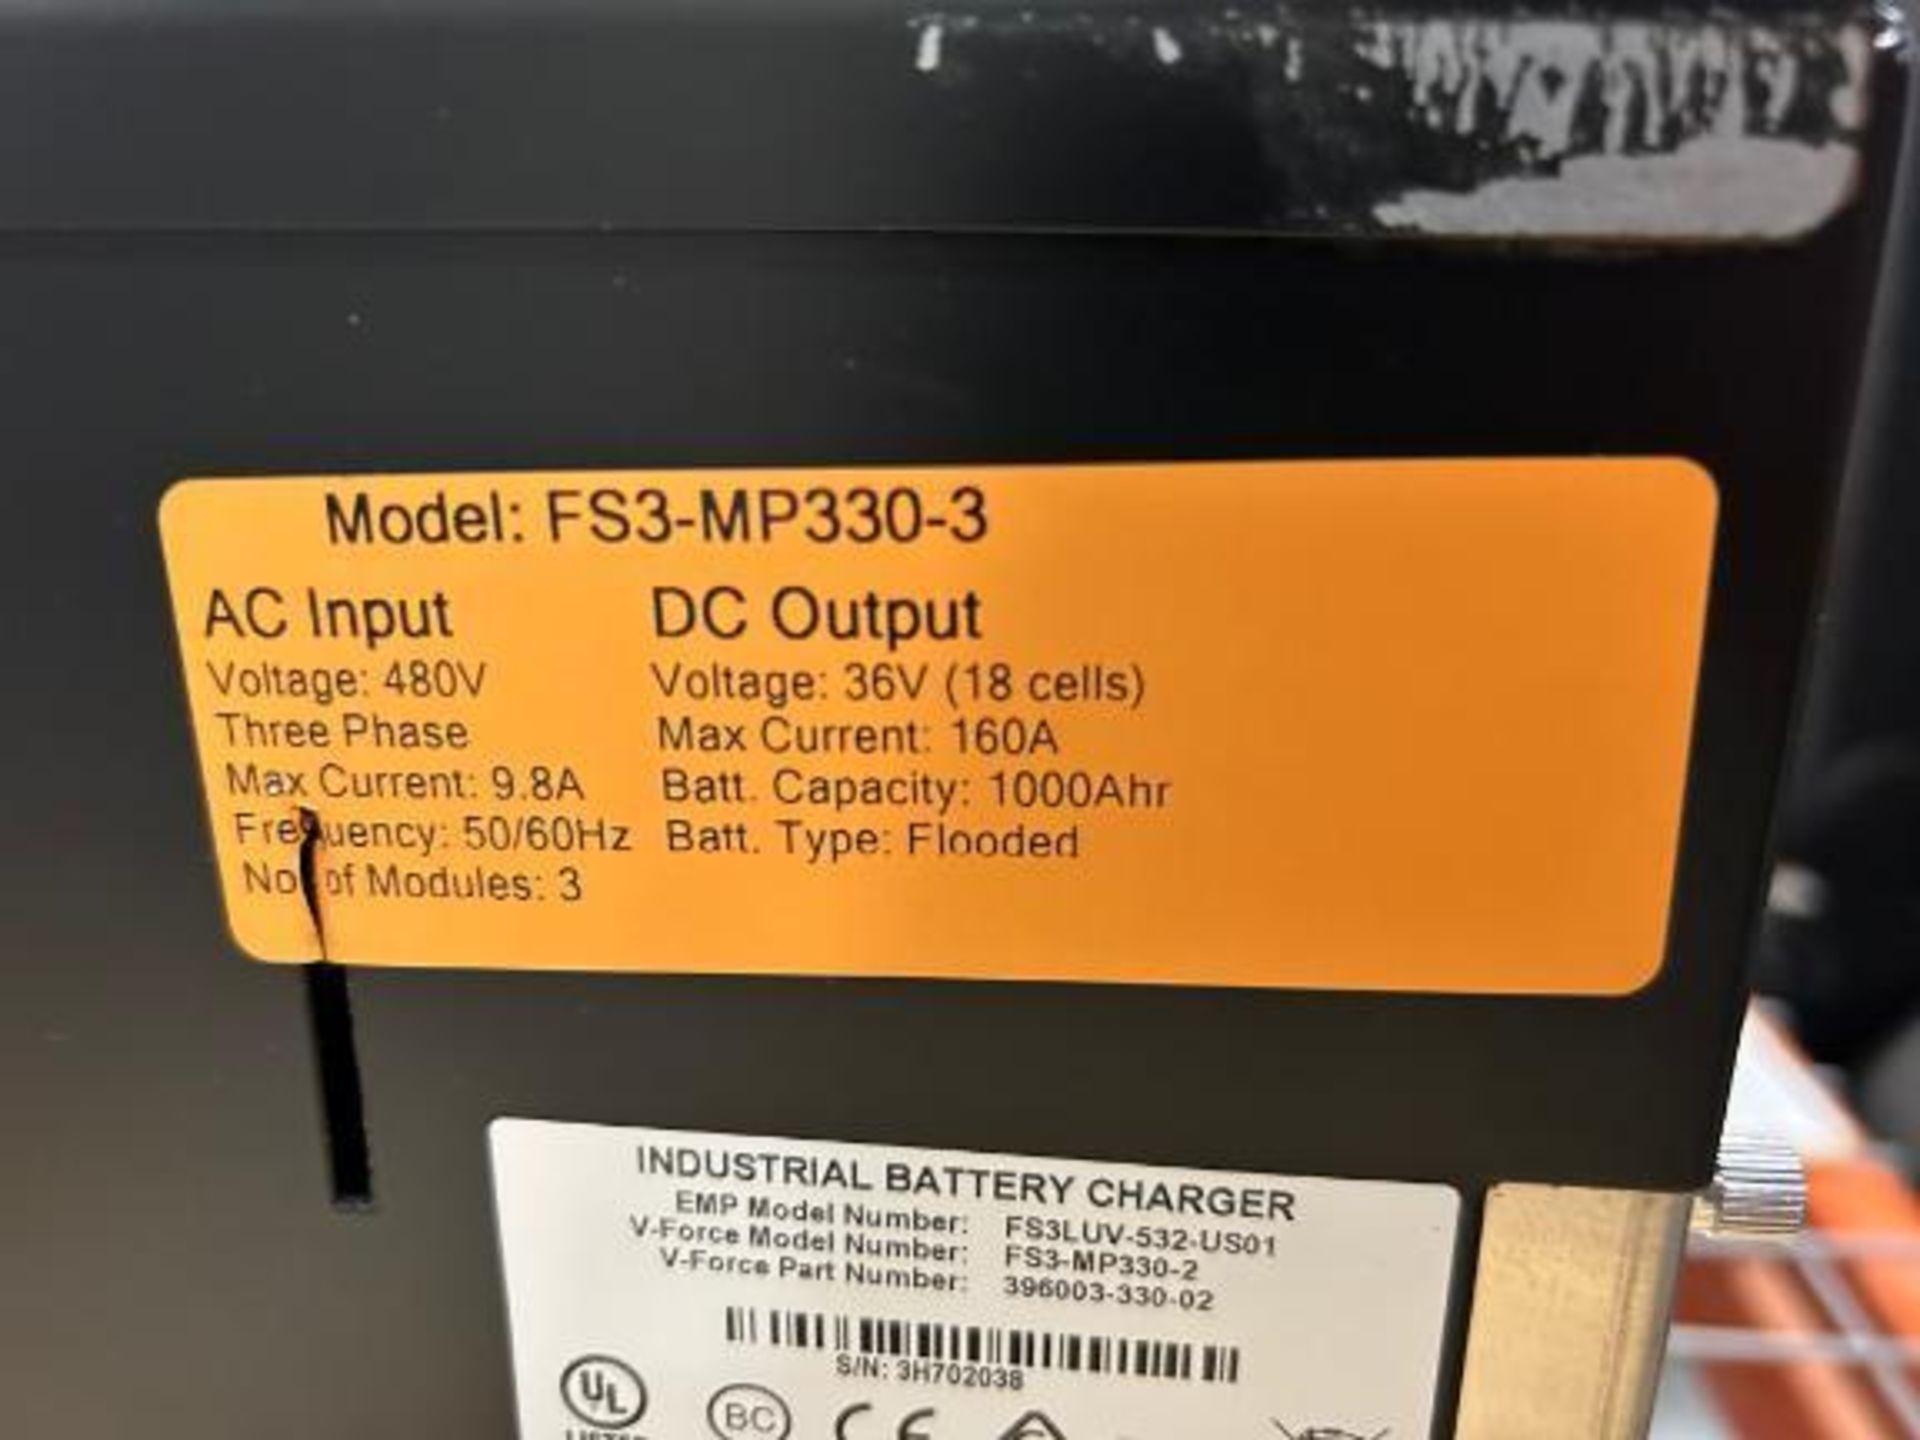 V-Force 36-Volt Battery Charger, Model: FS3-MP330-3, Max. Current: 160A, Battery Capacity: 1000AHR, - Image 2 of 2